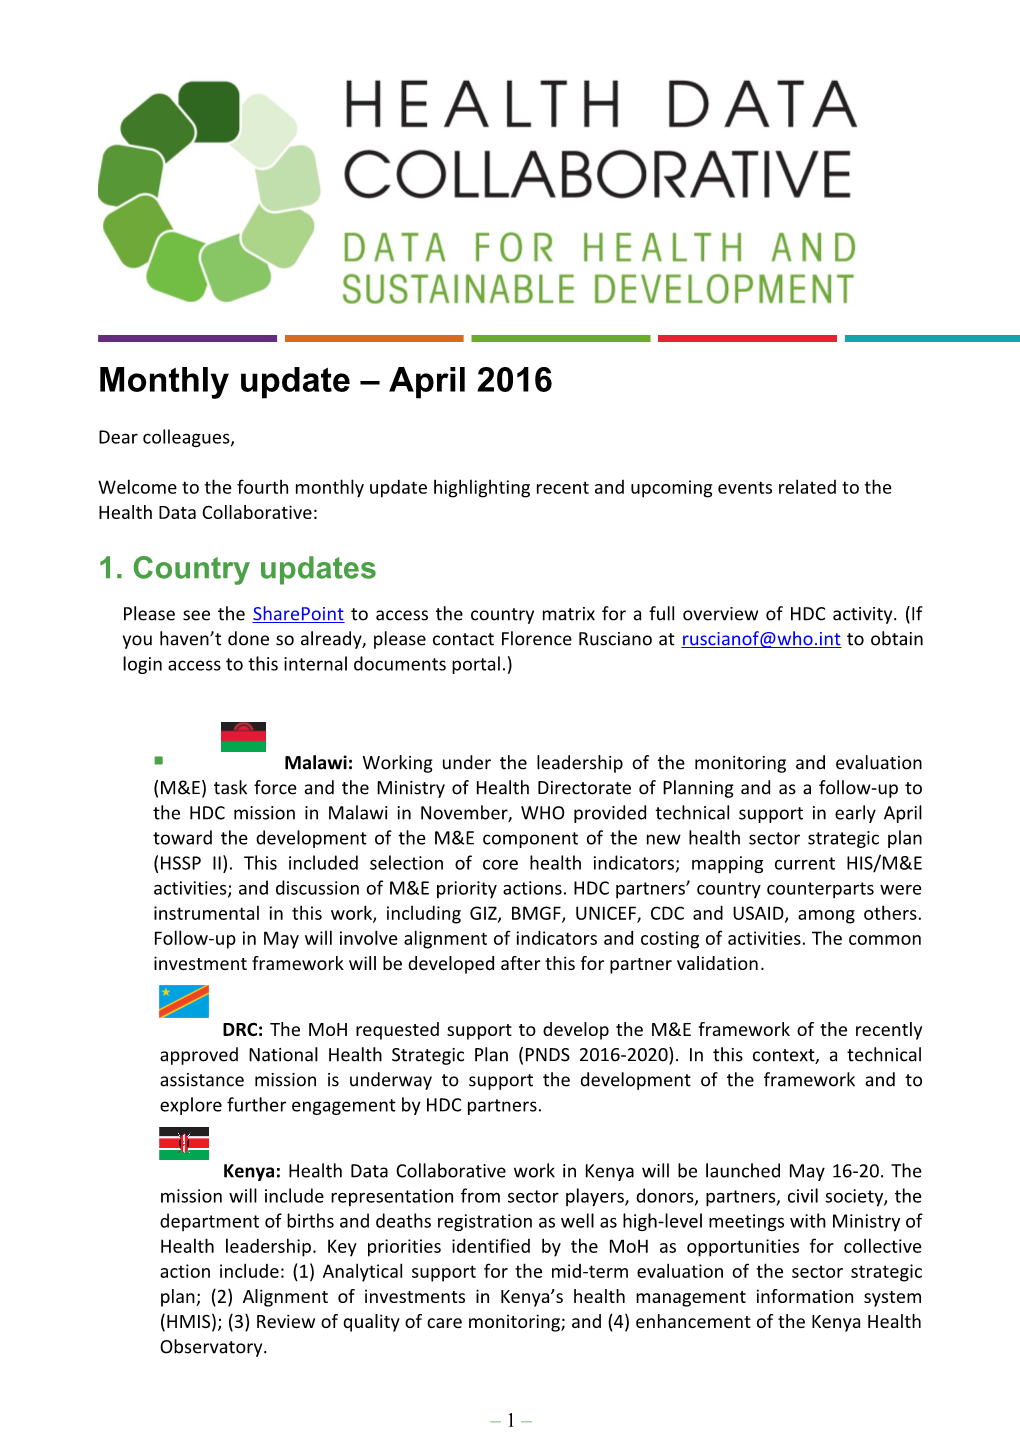 Health Data Collaborative Monthly Update April 2016